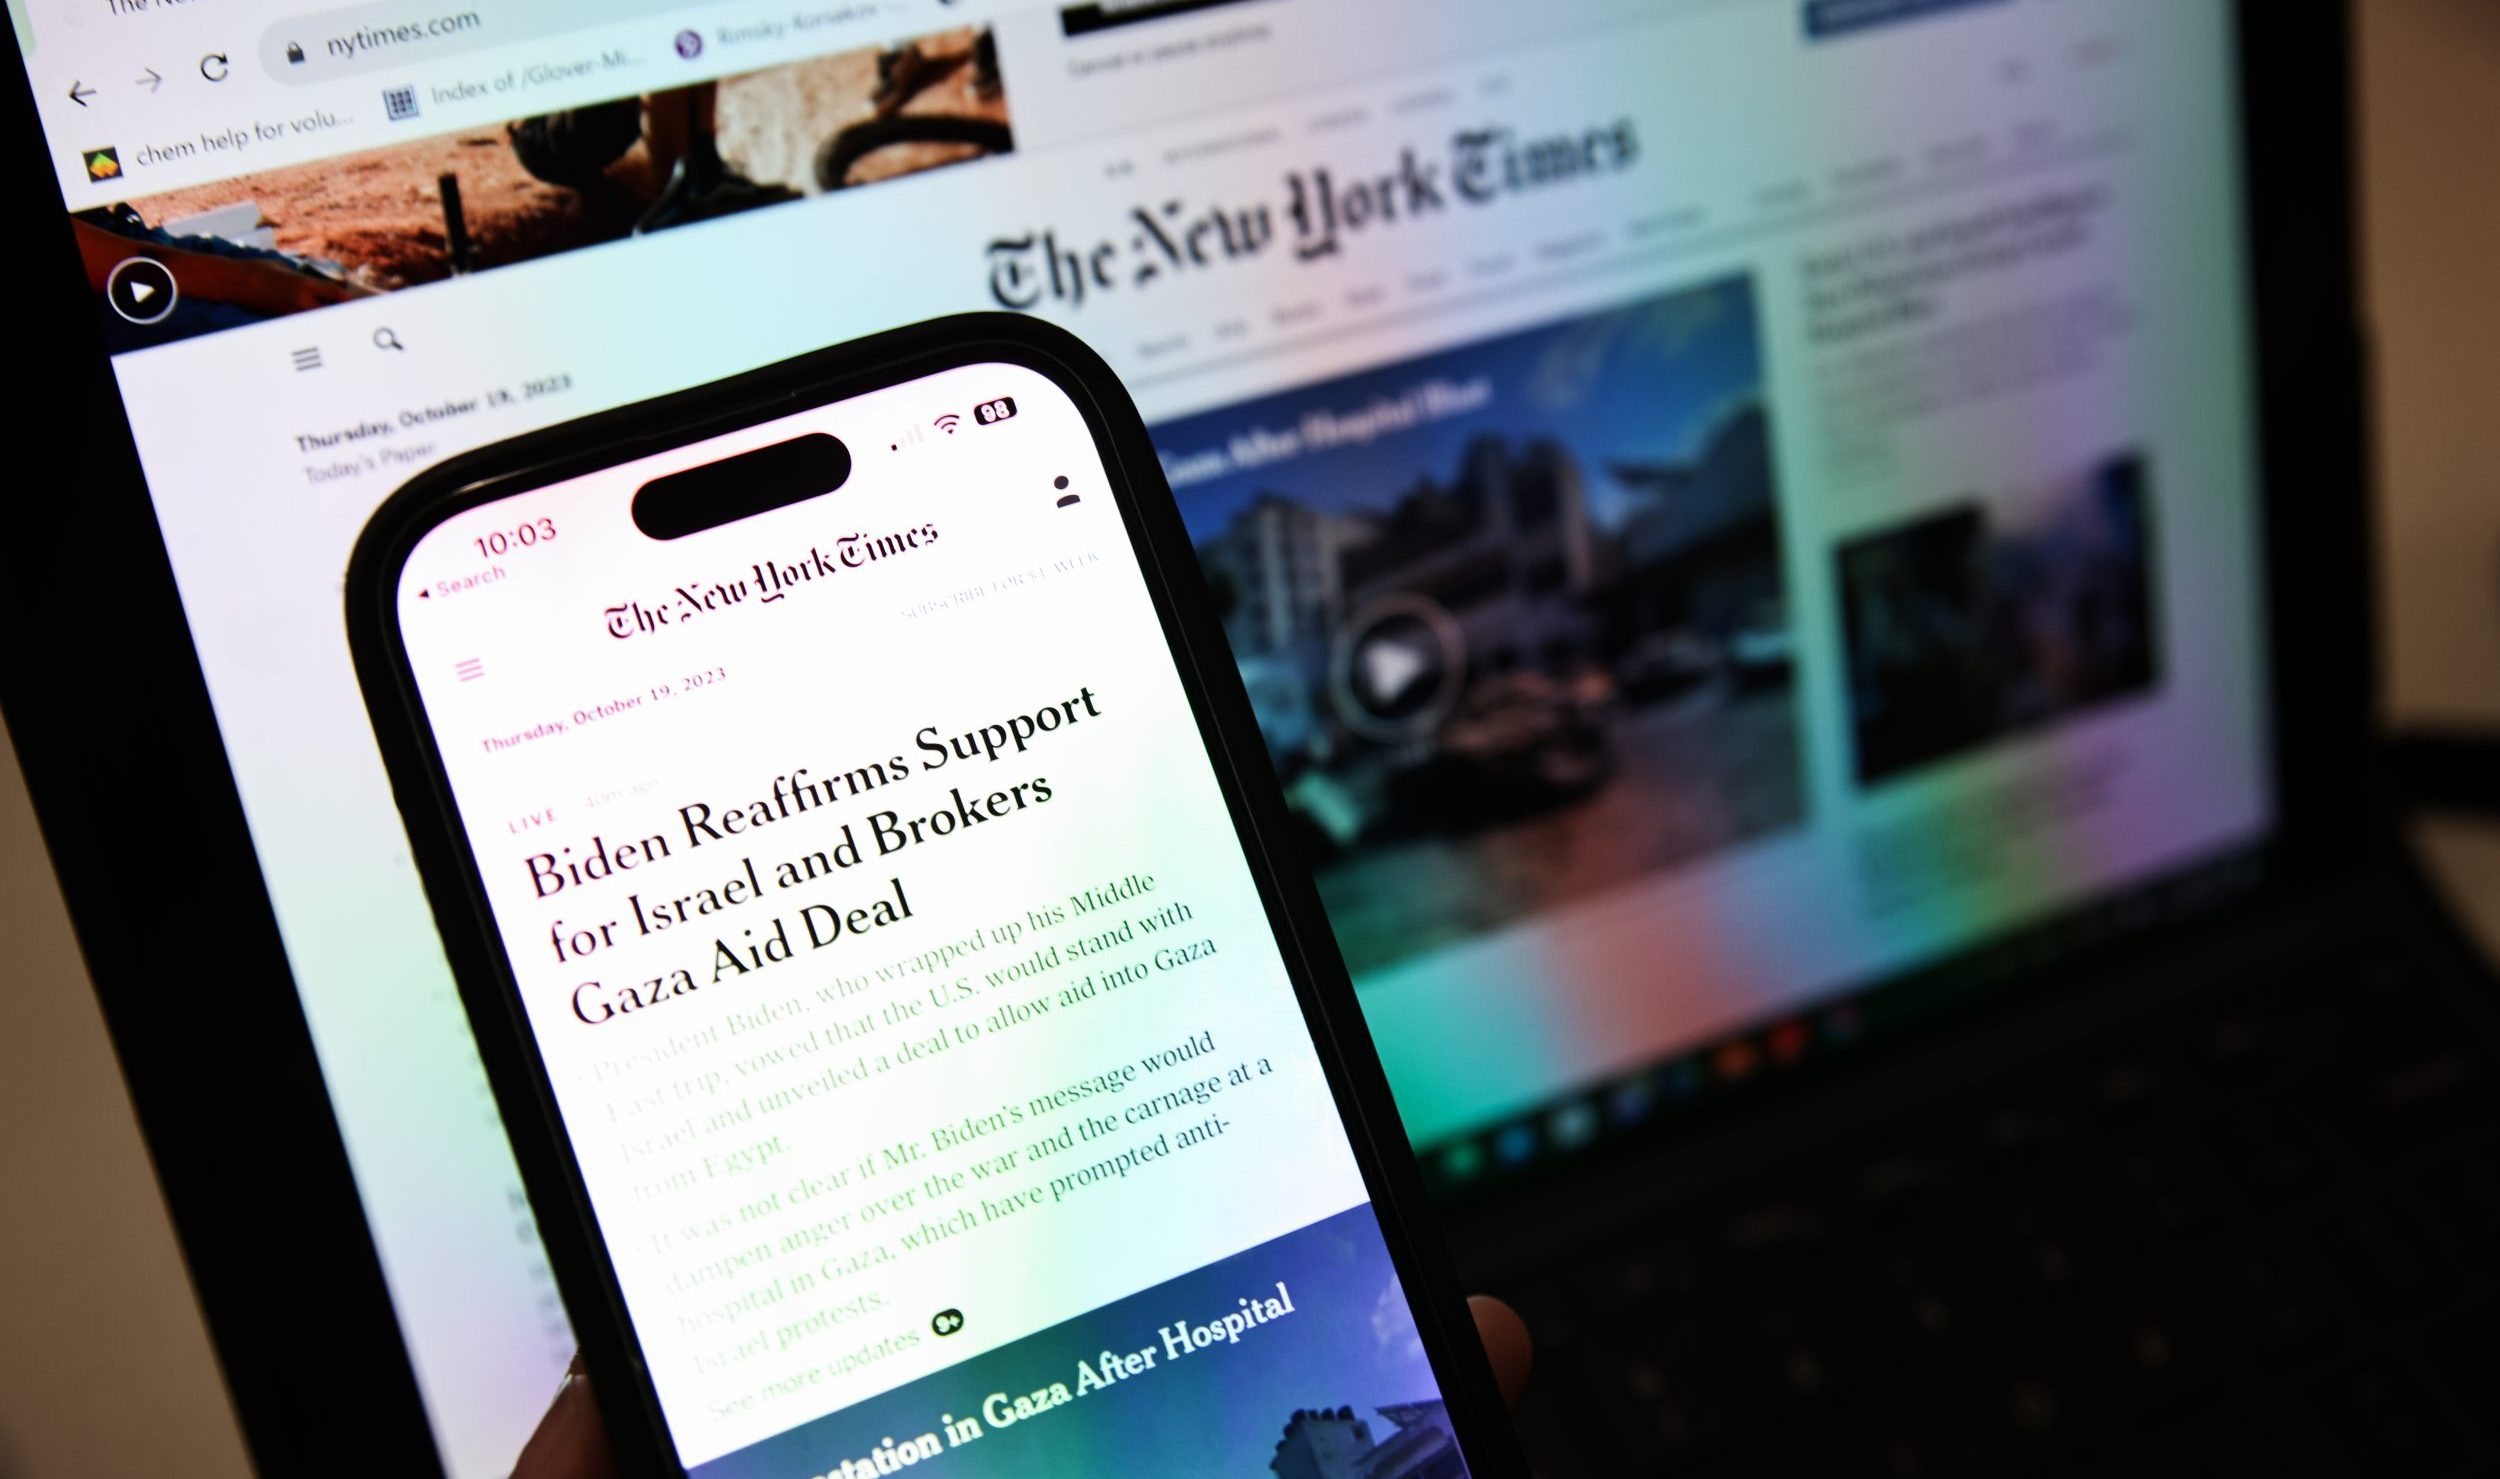 The New York Times gives students free access to articles and more